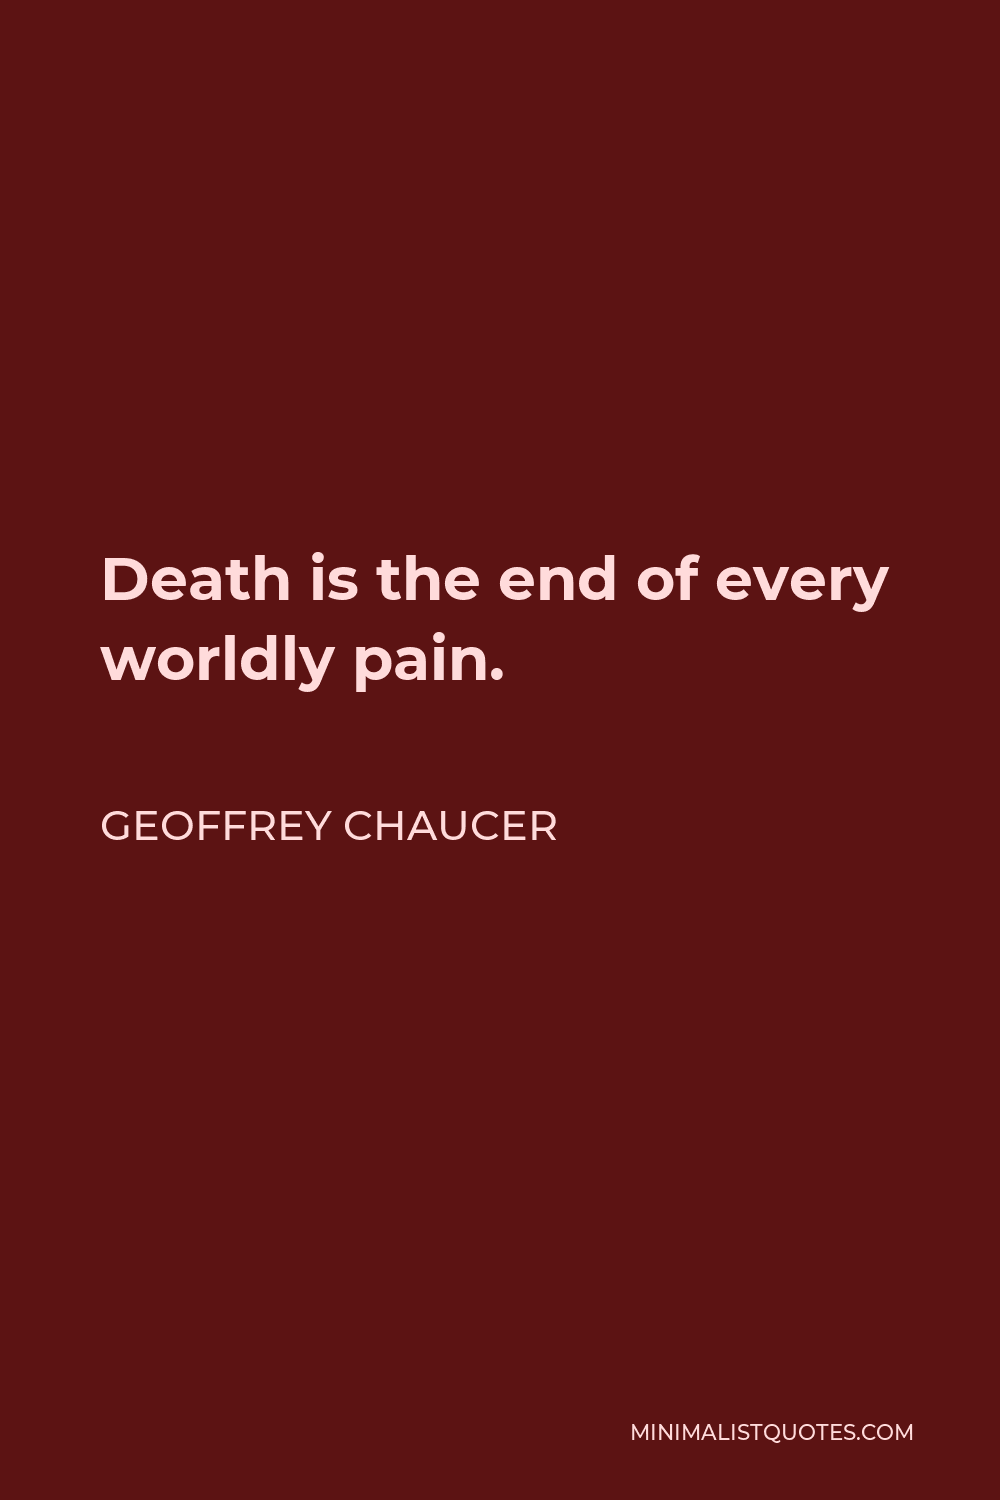 Geoffrey Chaucer Quote: Death is the end of every worldly pain.